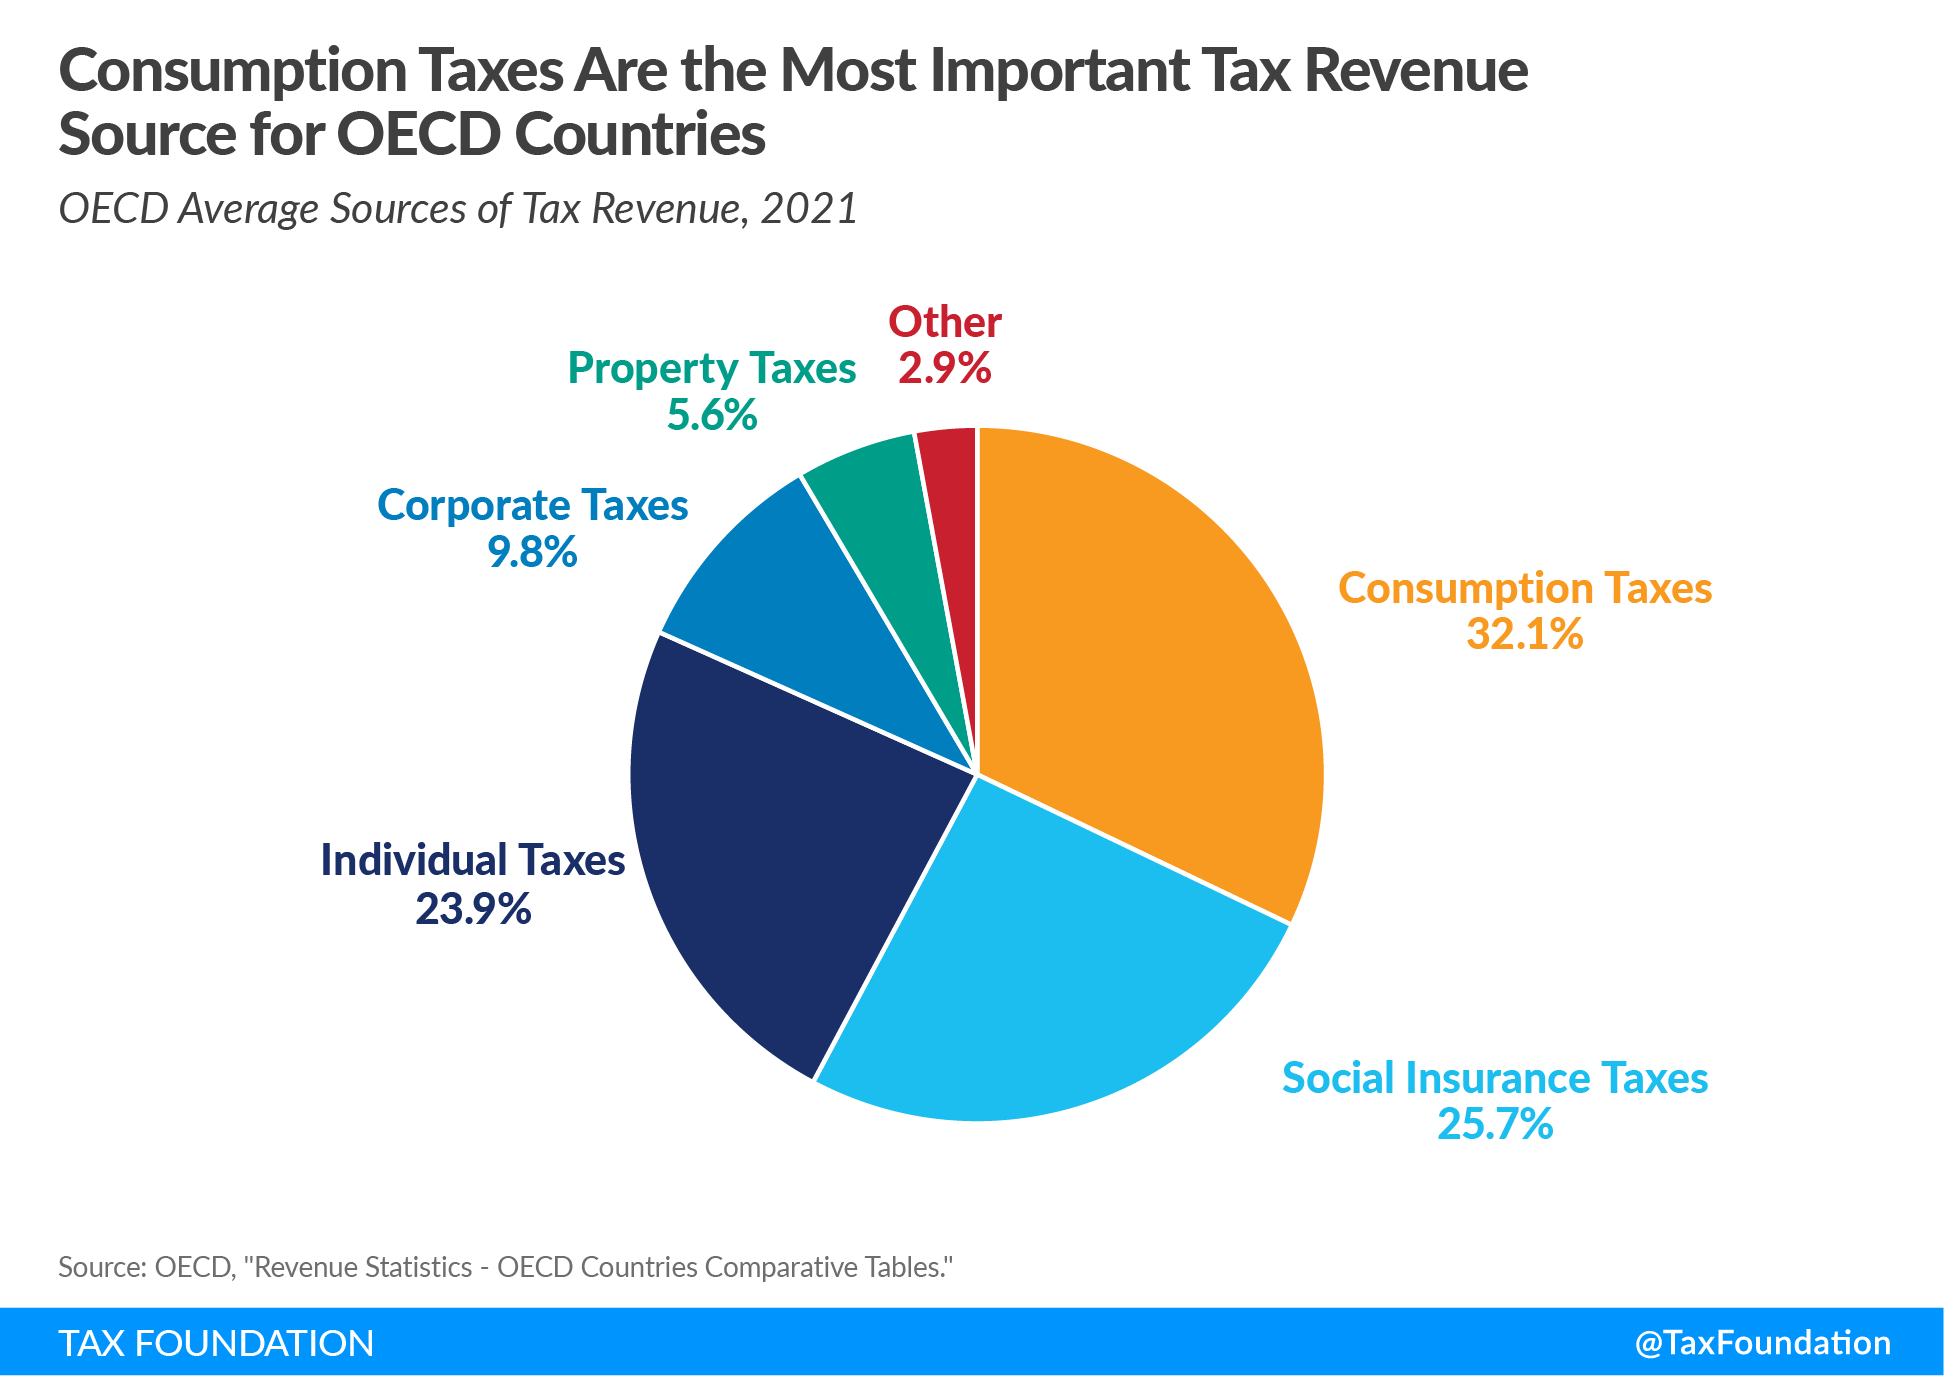 Consumption taxes are the most important OECD tax revenue source overall